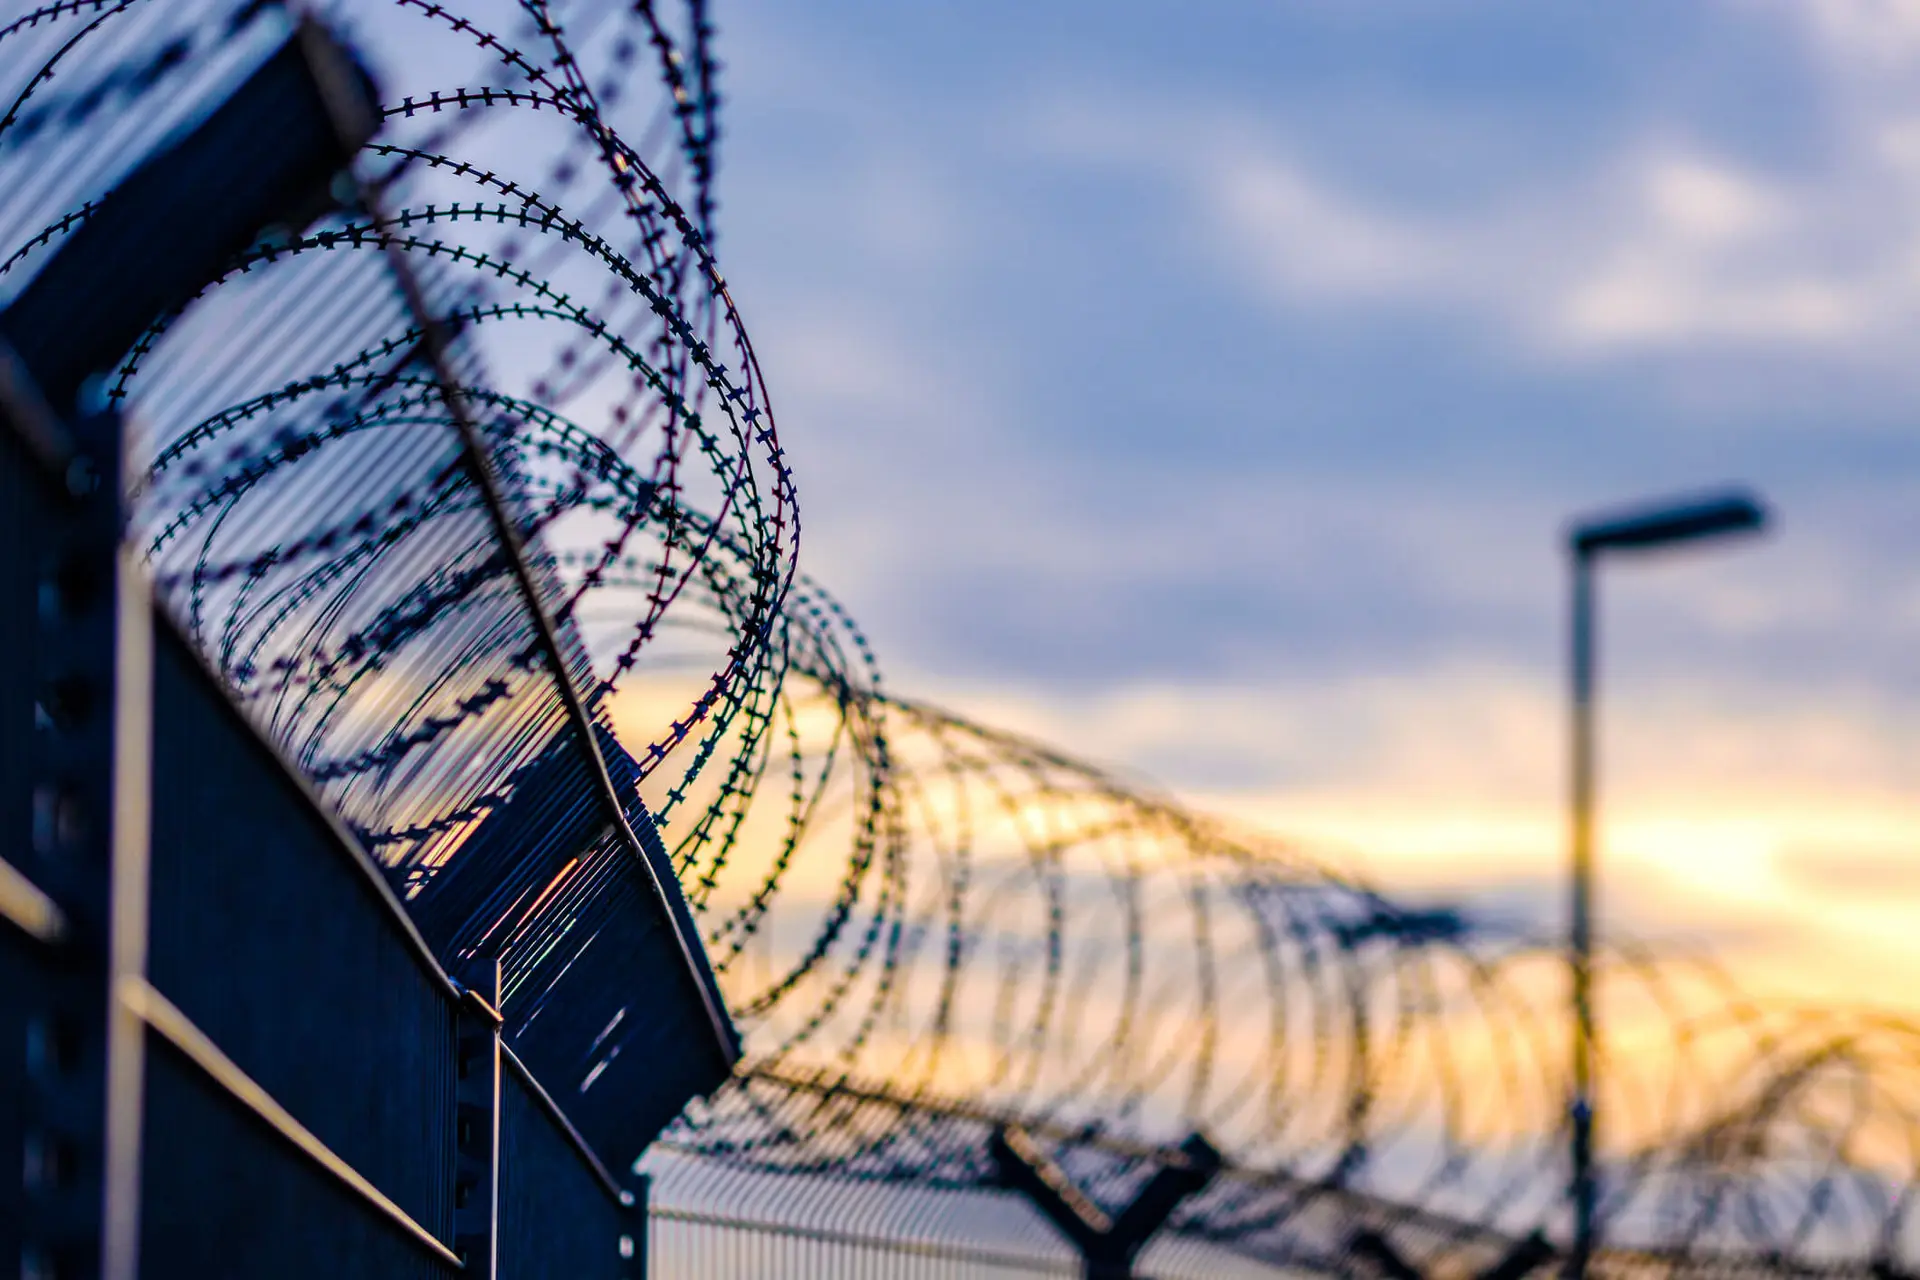 No Way To Escape: Assault and Abuse in Correctional Facilities